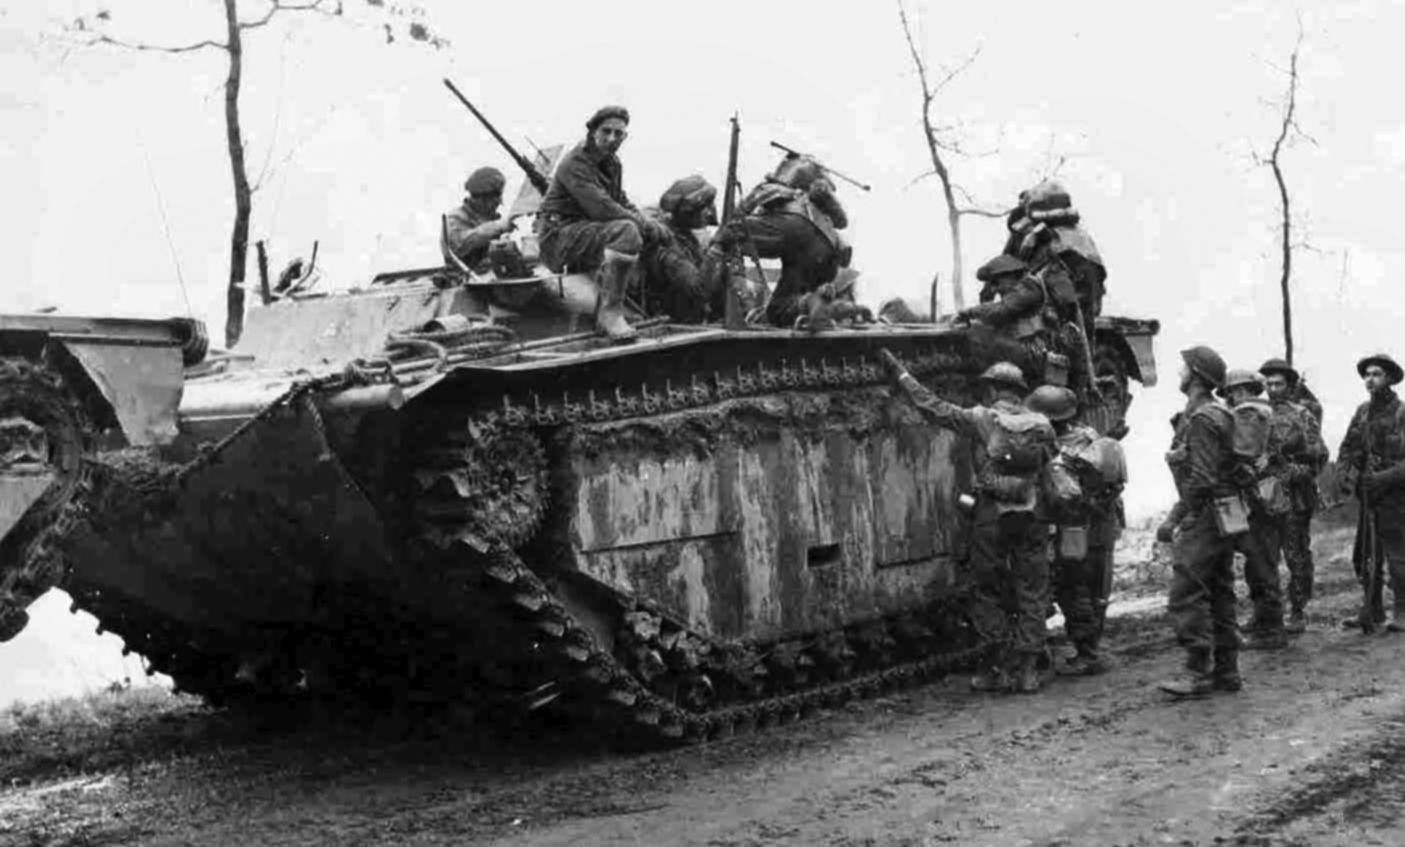 A Canadian armoured personnel carrier—”Kangaroo”—made from the modified chassis of an M4 Sherman medium tank, carries Allied soldiers during Operation Veritable.